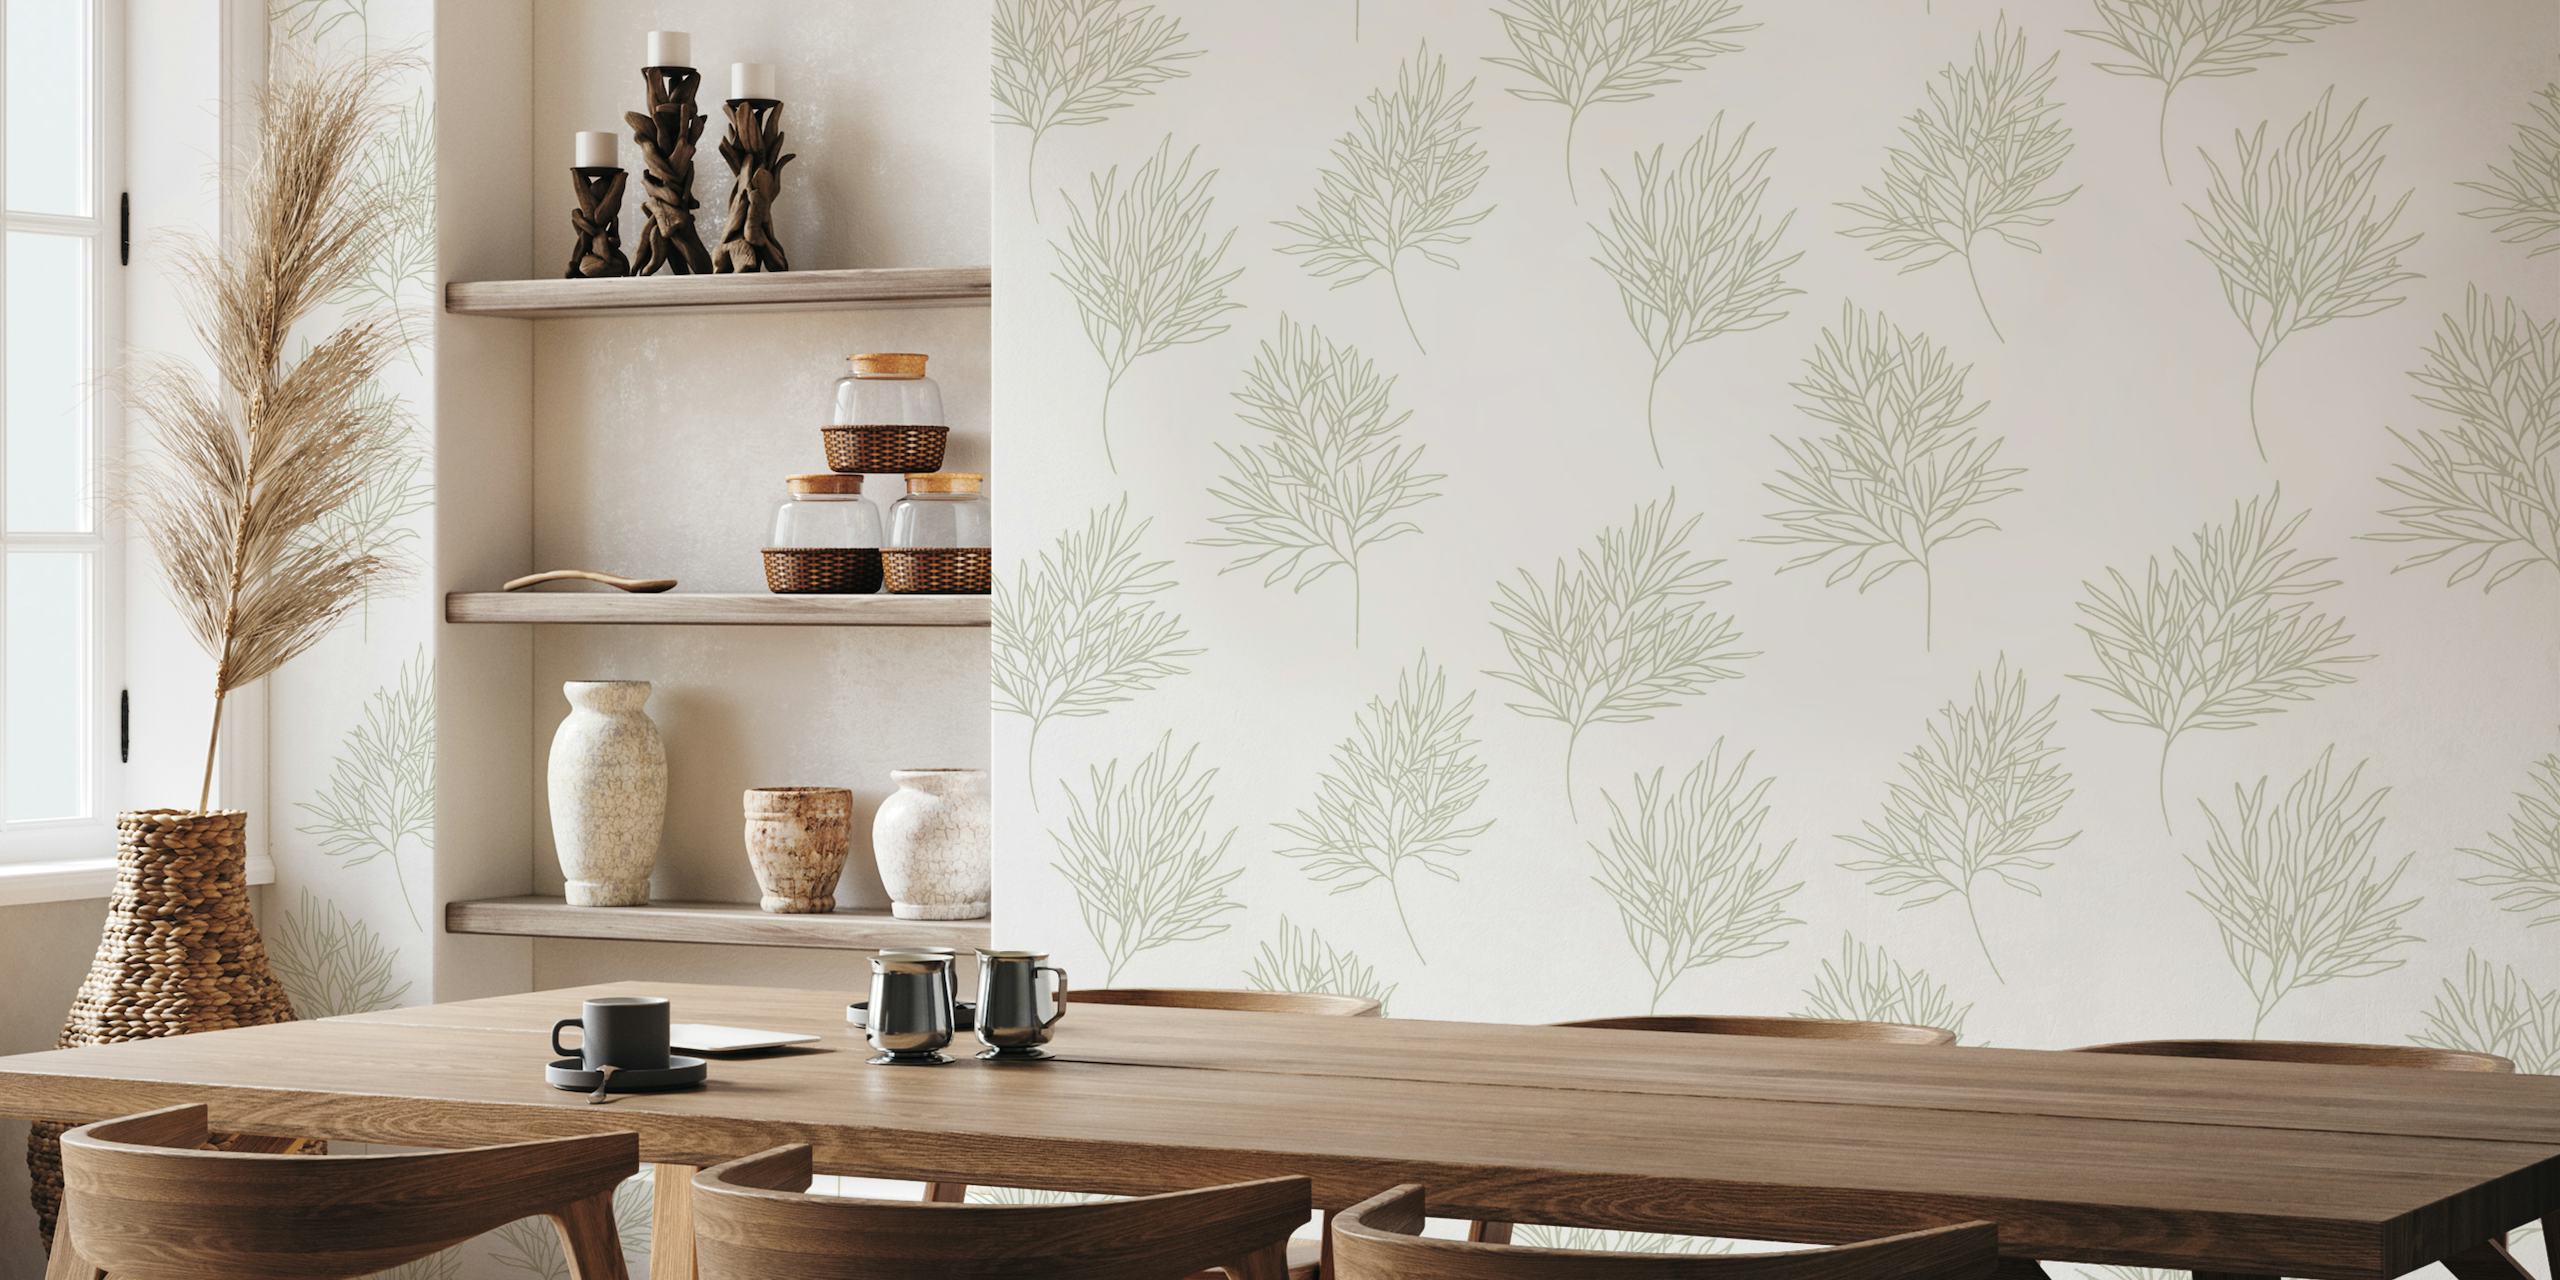 Sketch-style wall mural with delicate branches on a neutral background